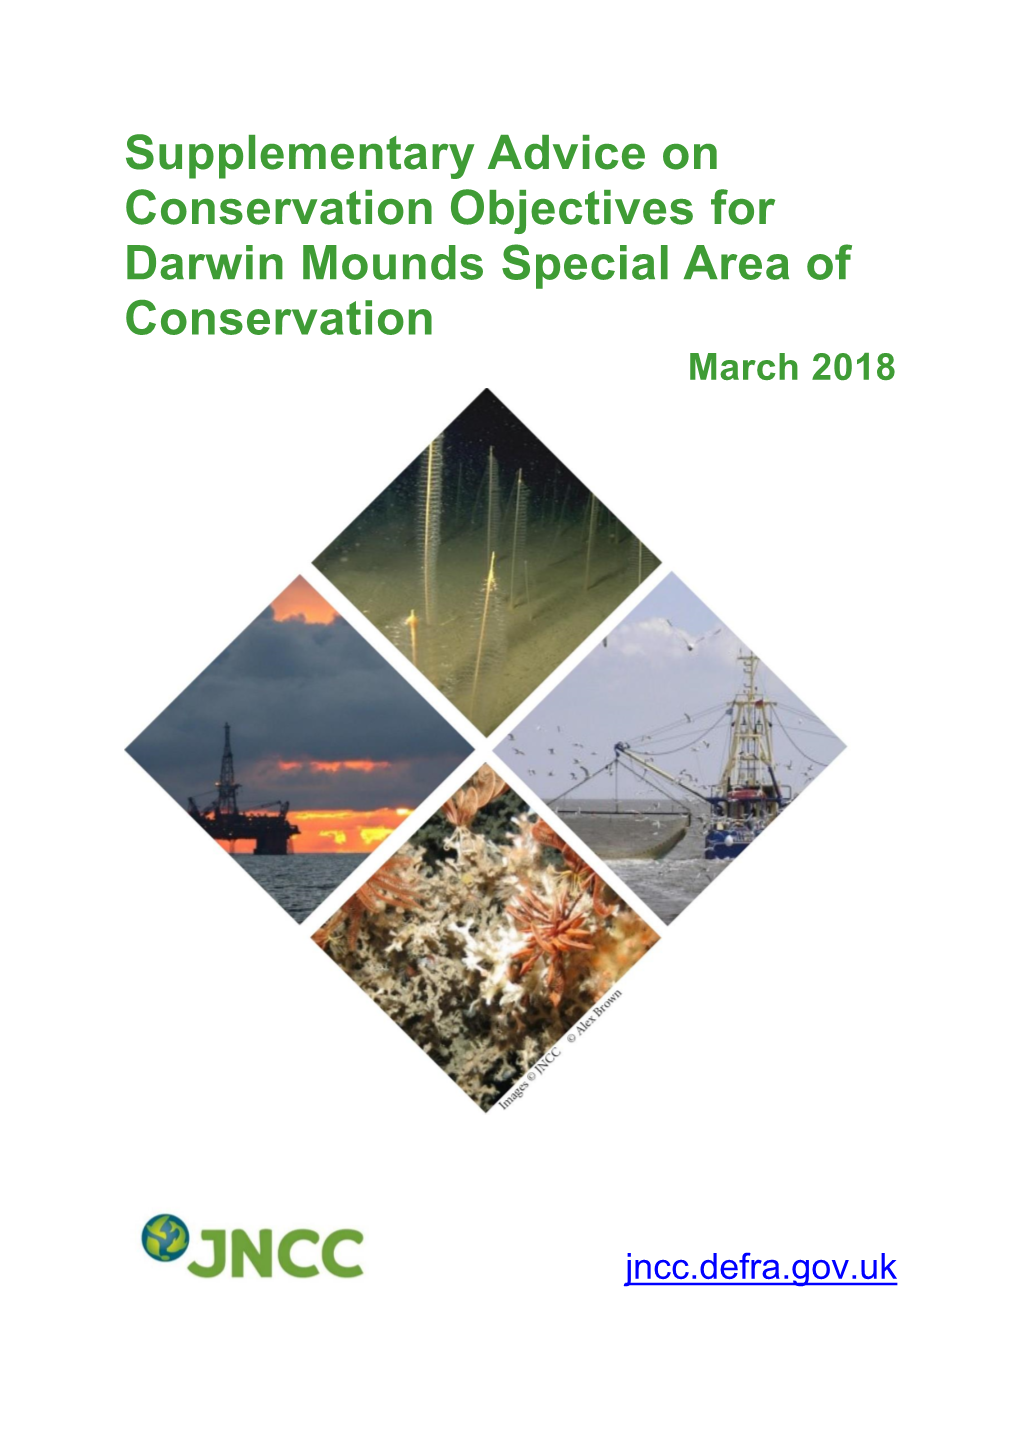 Darwin Mounds Supplementary Advice on Conservation Objectives